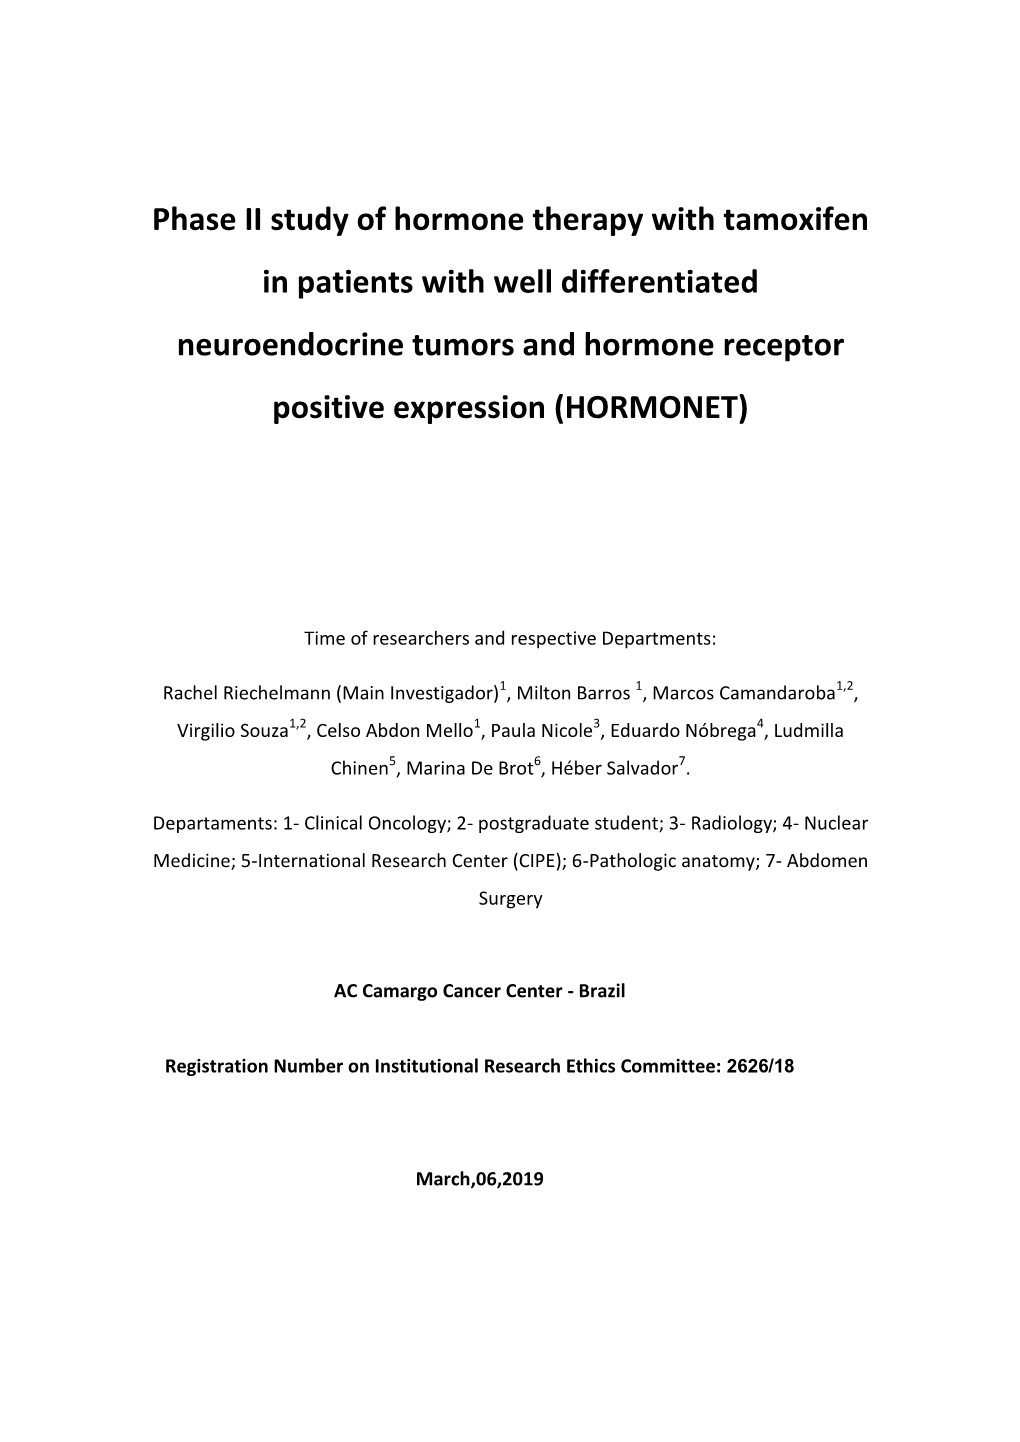 Phase II Study of Hormone Therapy with Tamoxifen in Patients with Well Differentiated Neuroendocrine Tumors and Hormone Receptor Positive Expression (HORMONET)